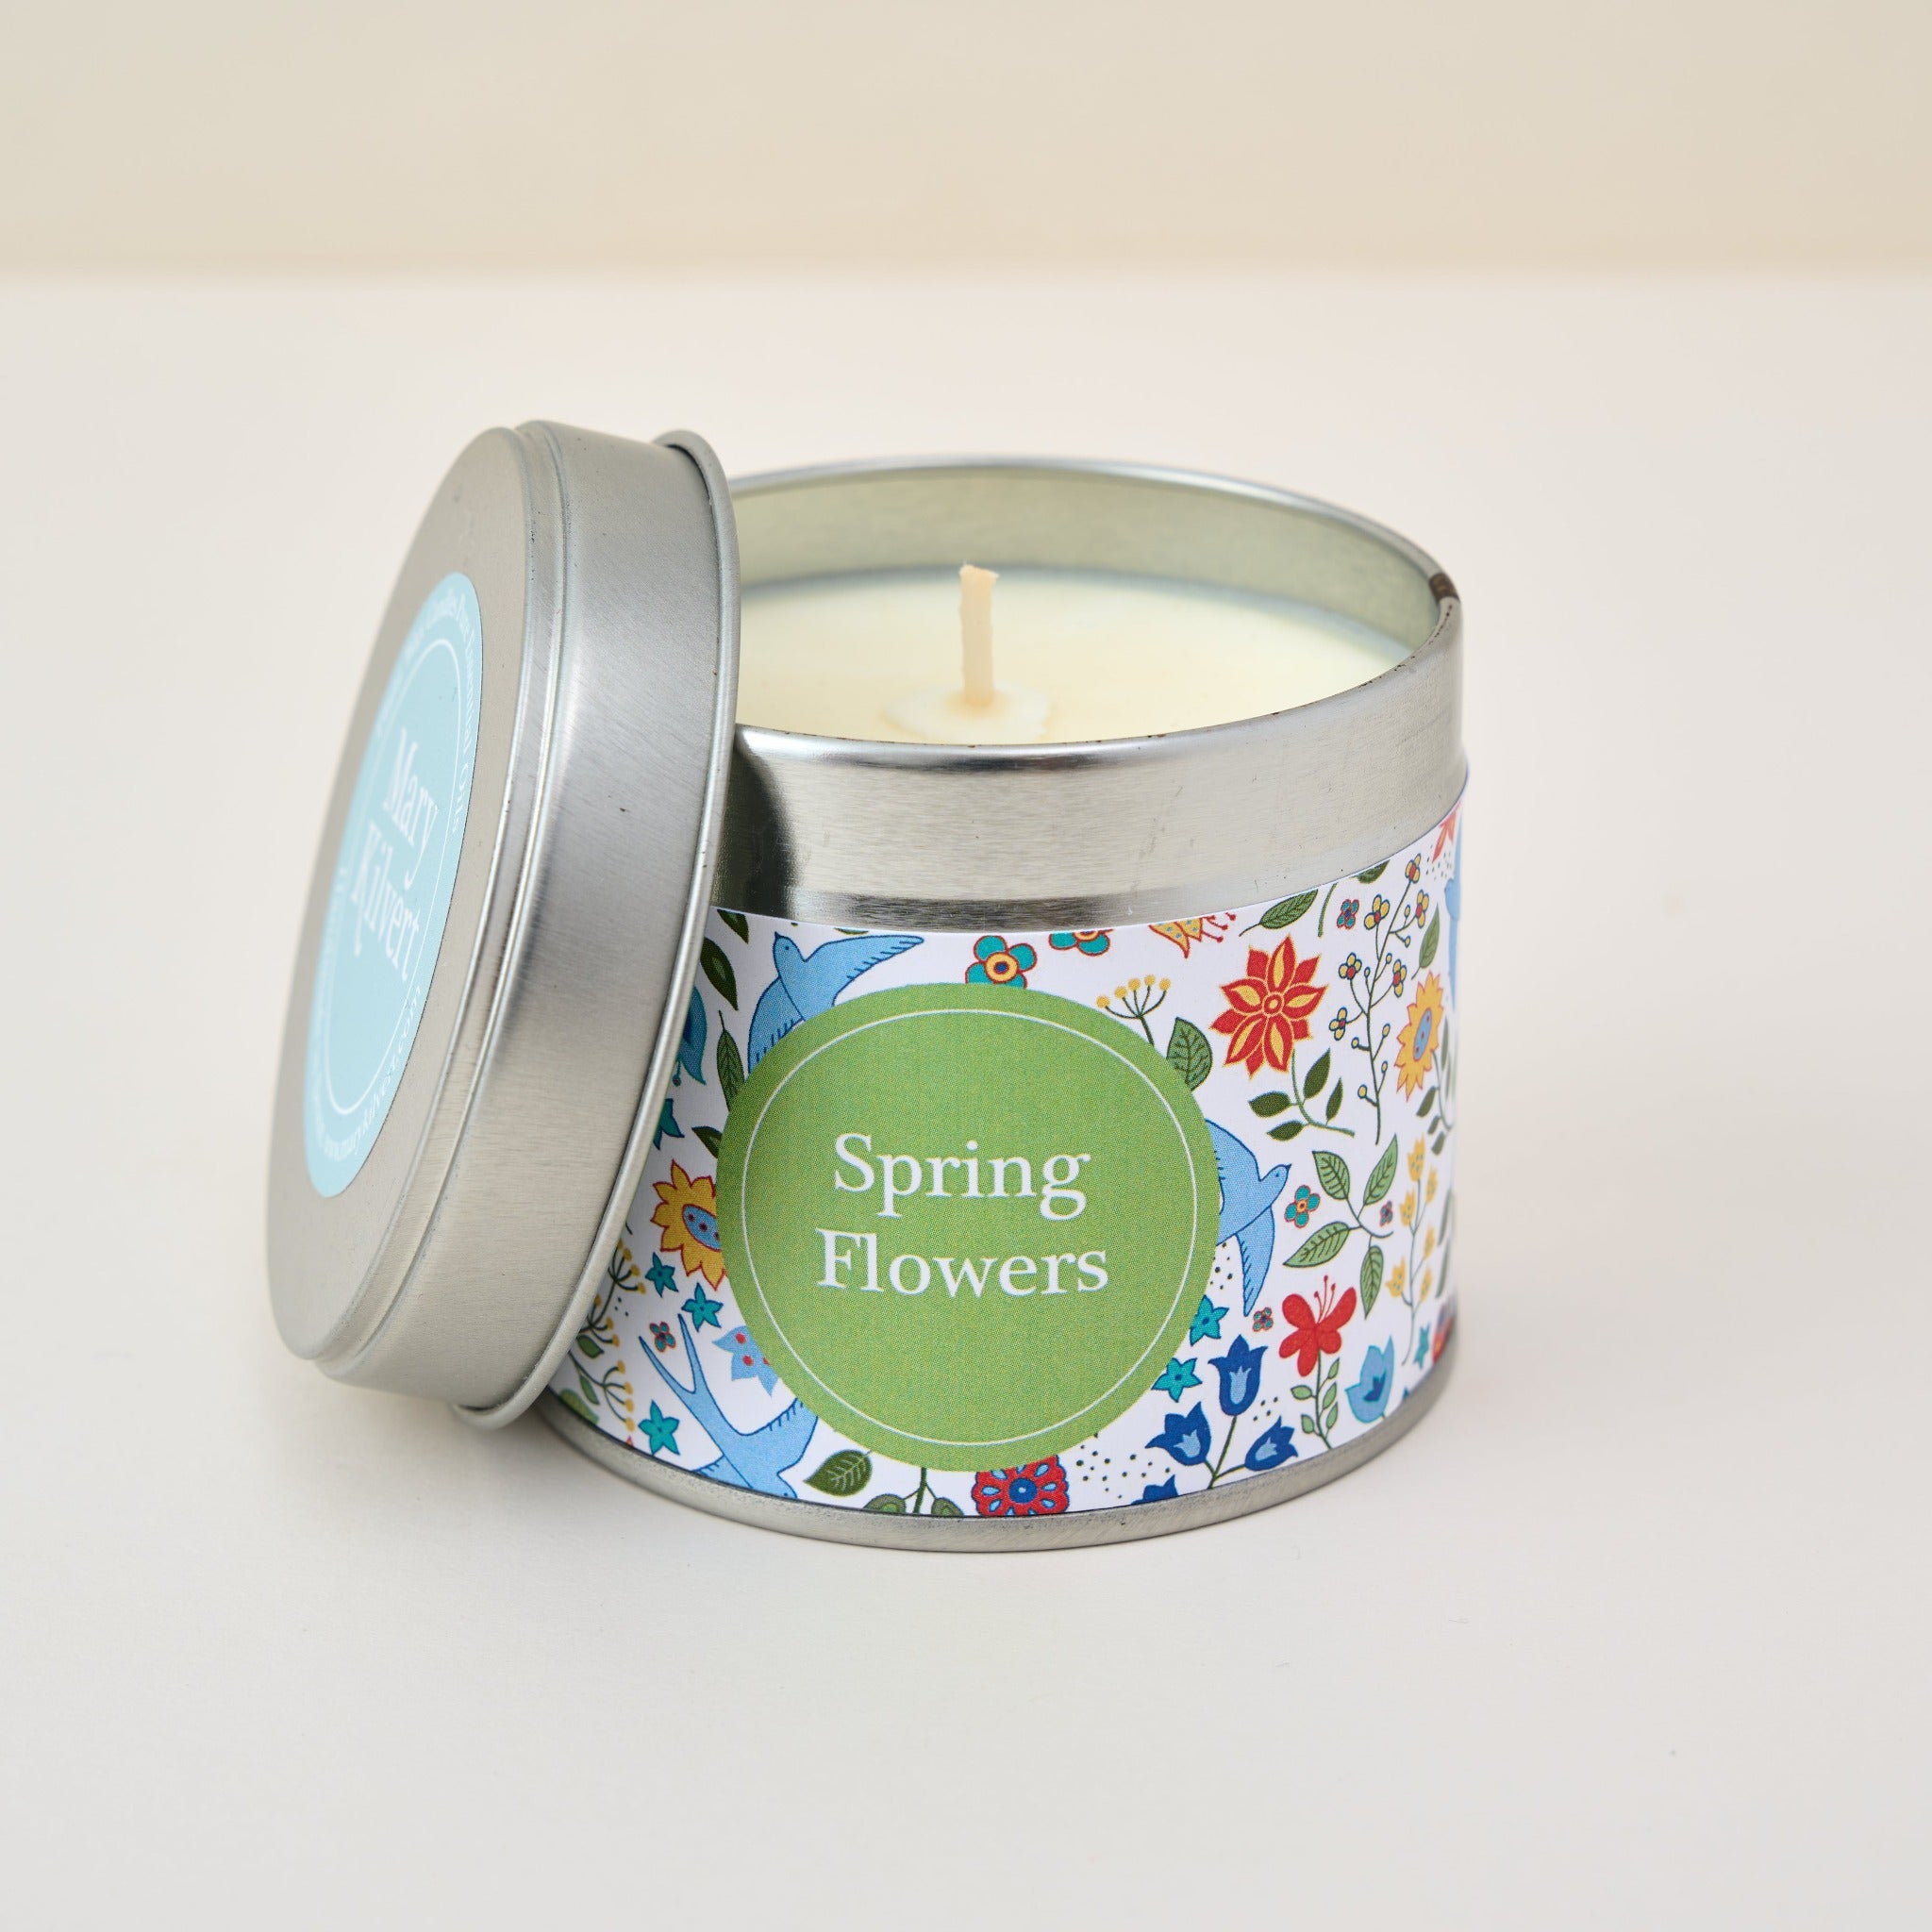 Spring Flowers Candle by Mary Kilvert